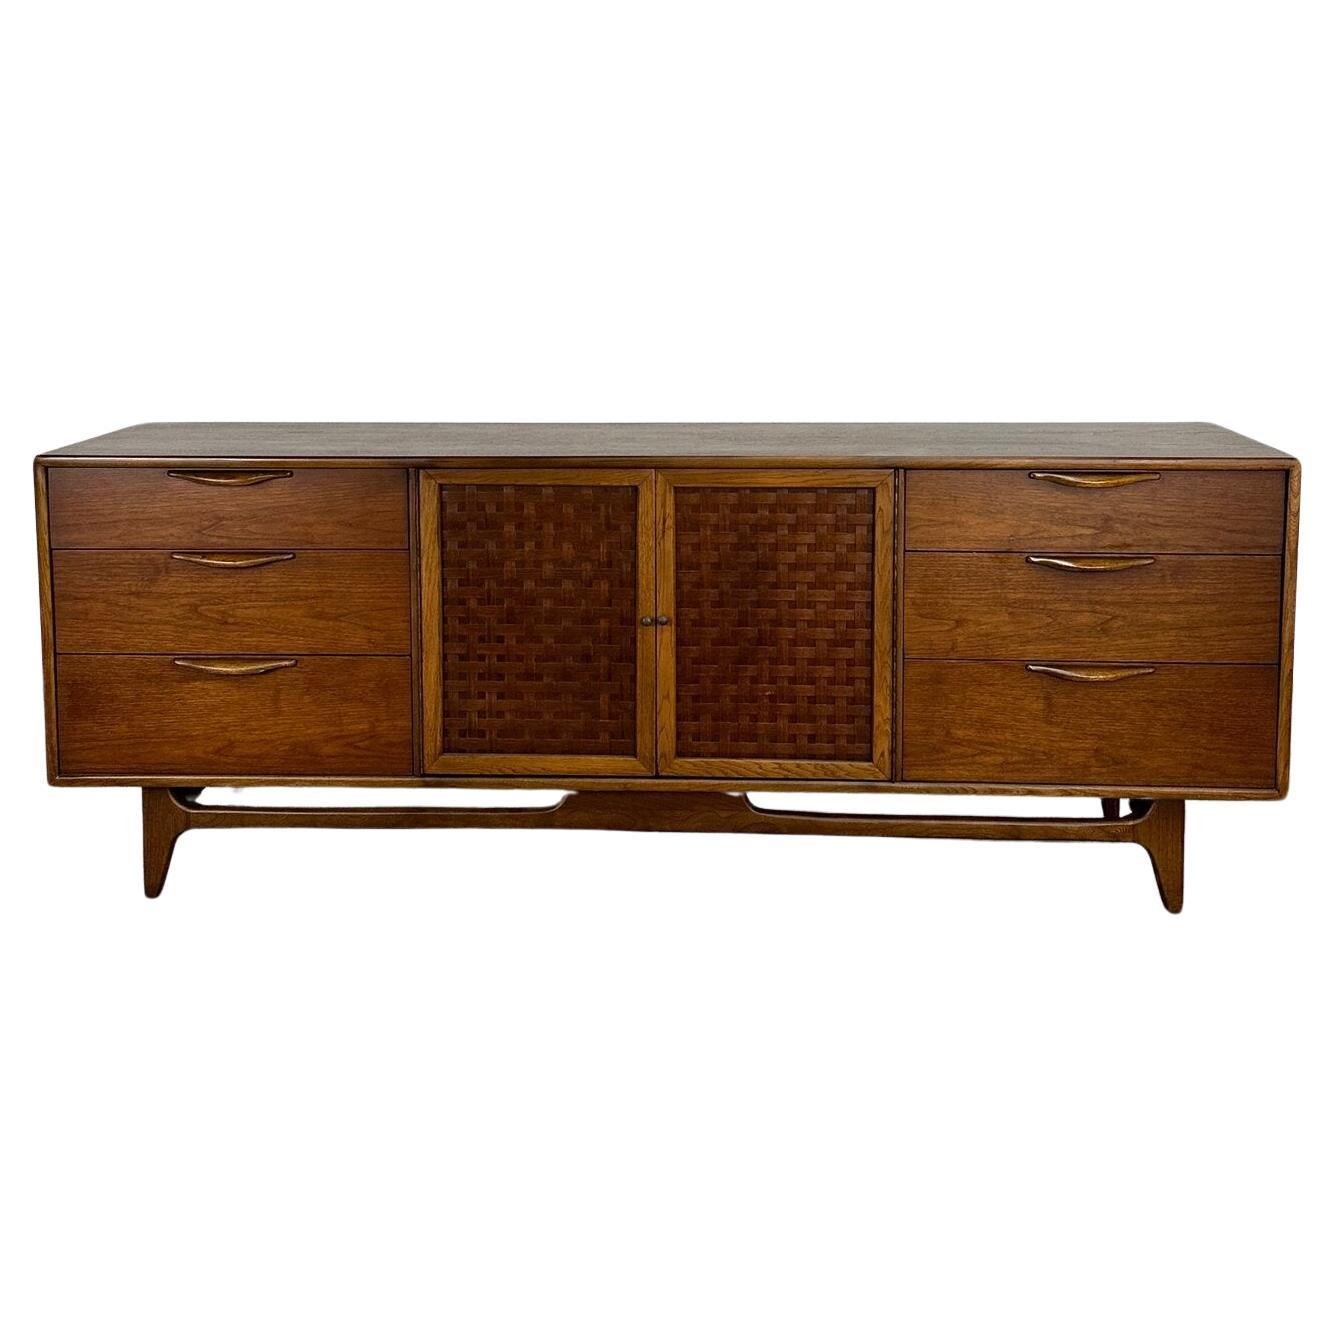 Perception series Walnut Credenza by Lane For Sale